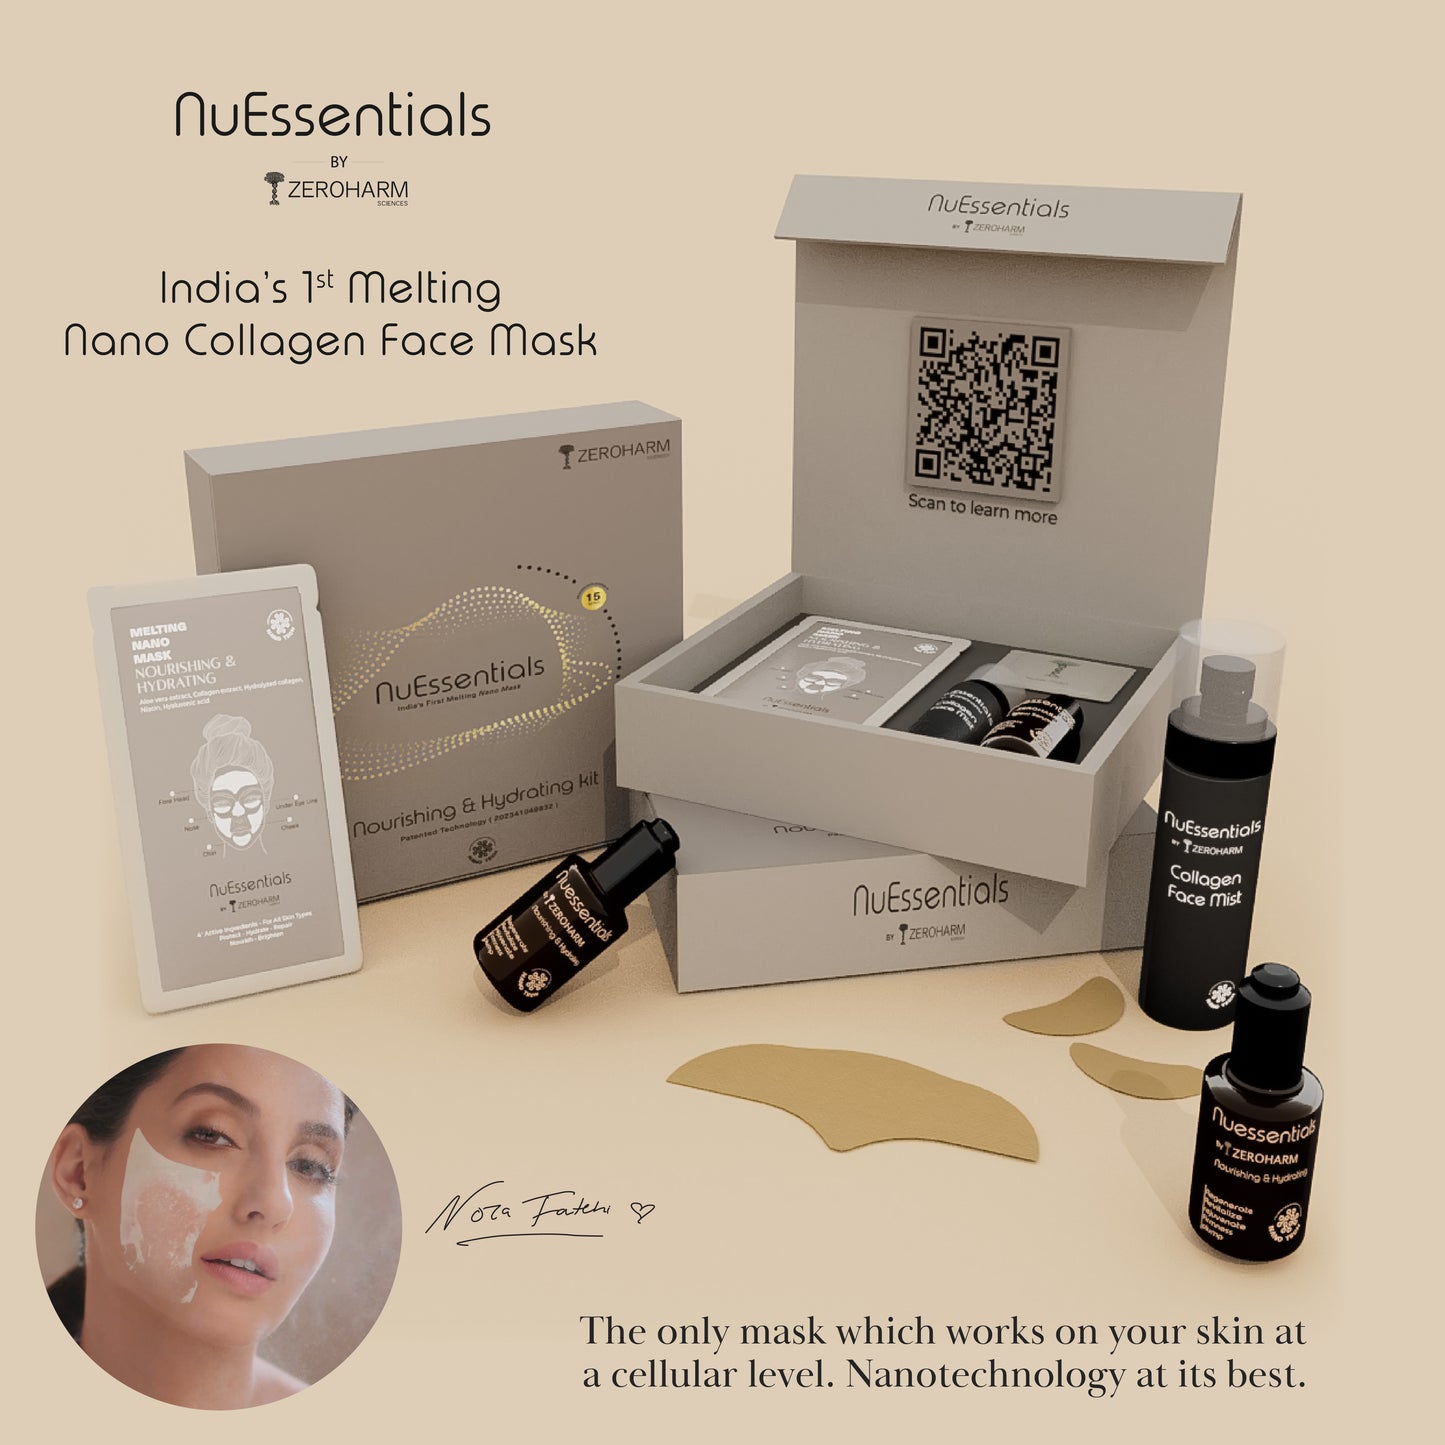 Nuessentials hydrating facial kit with serum & mist